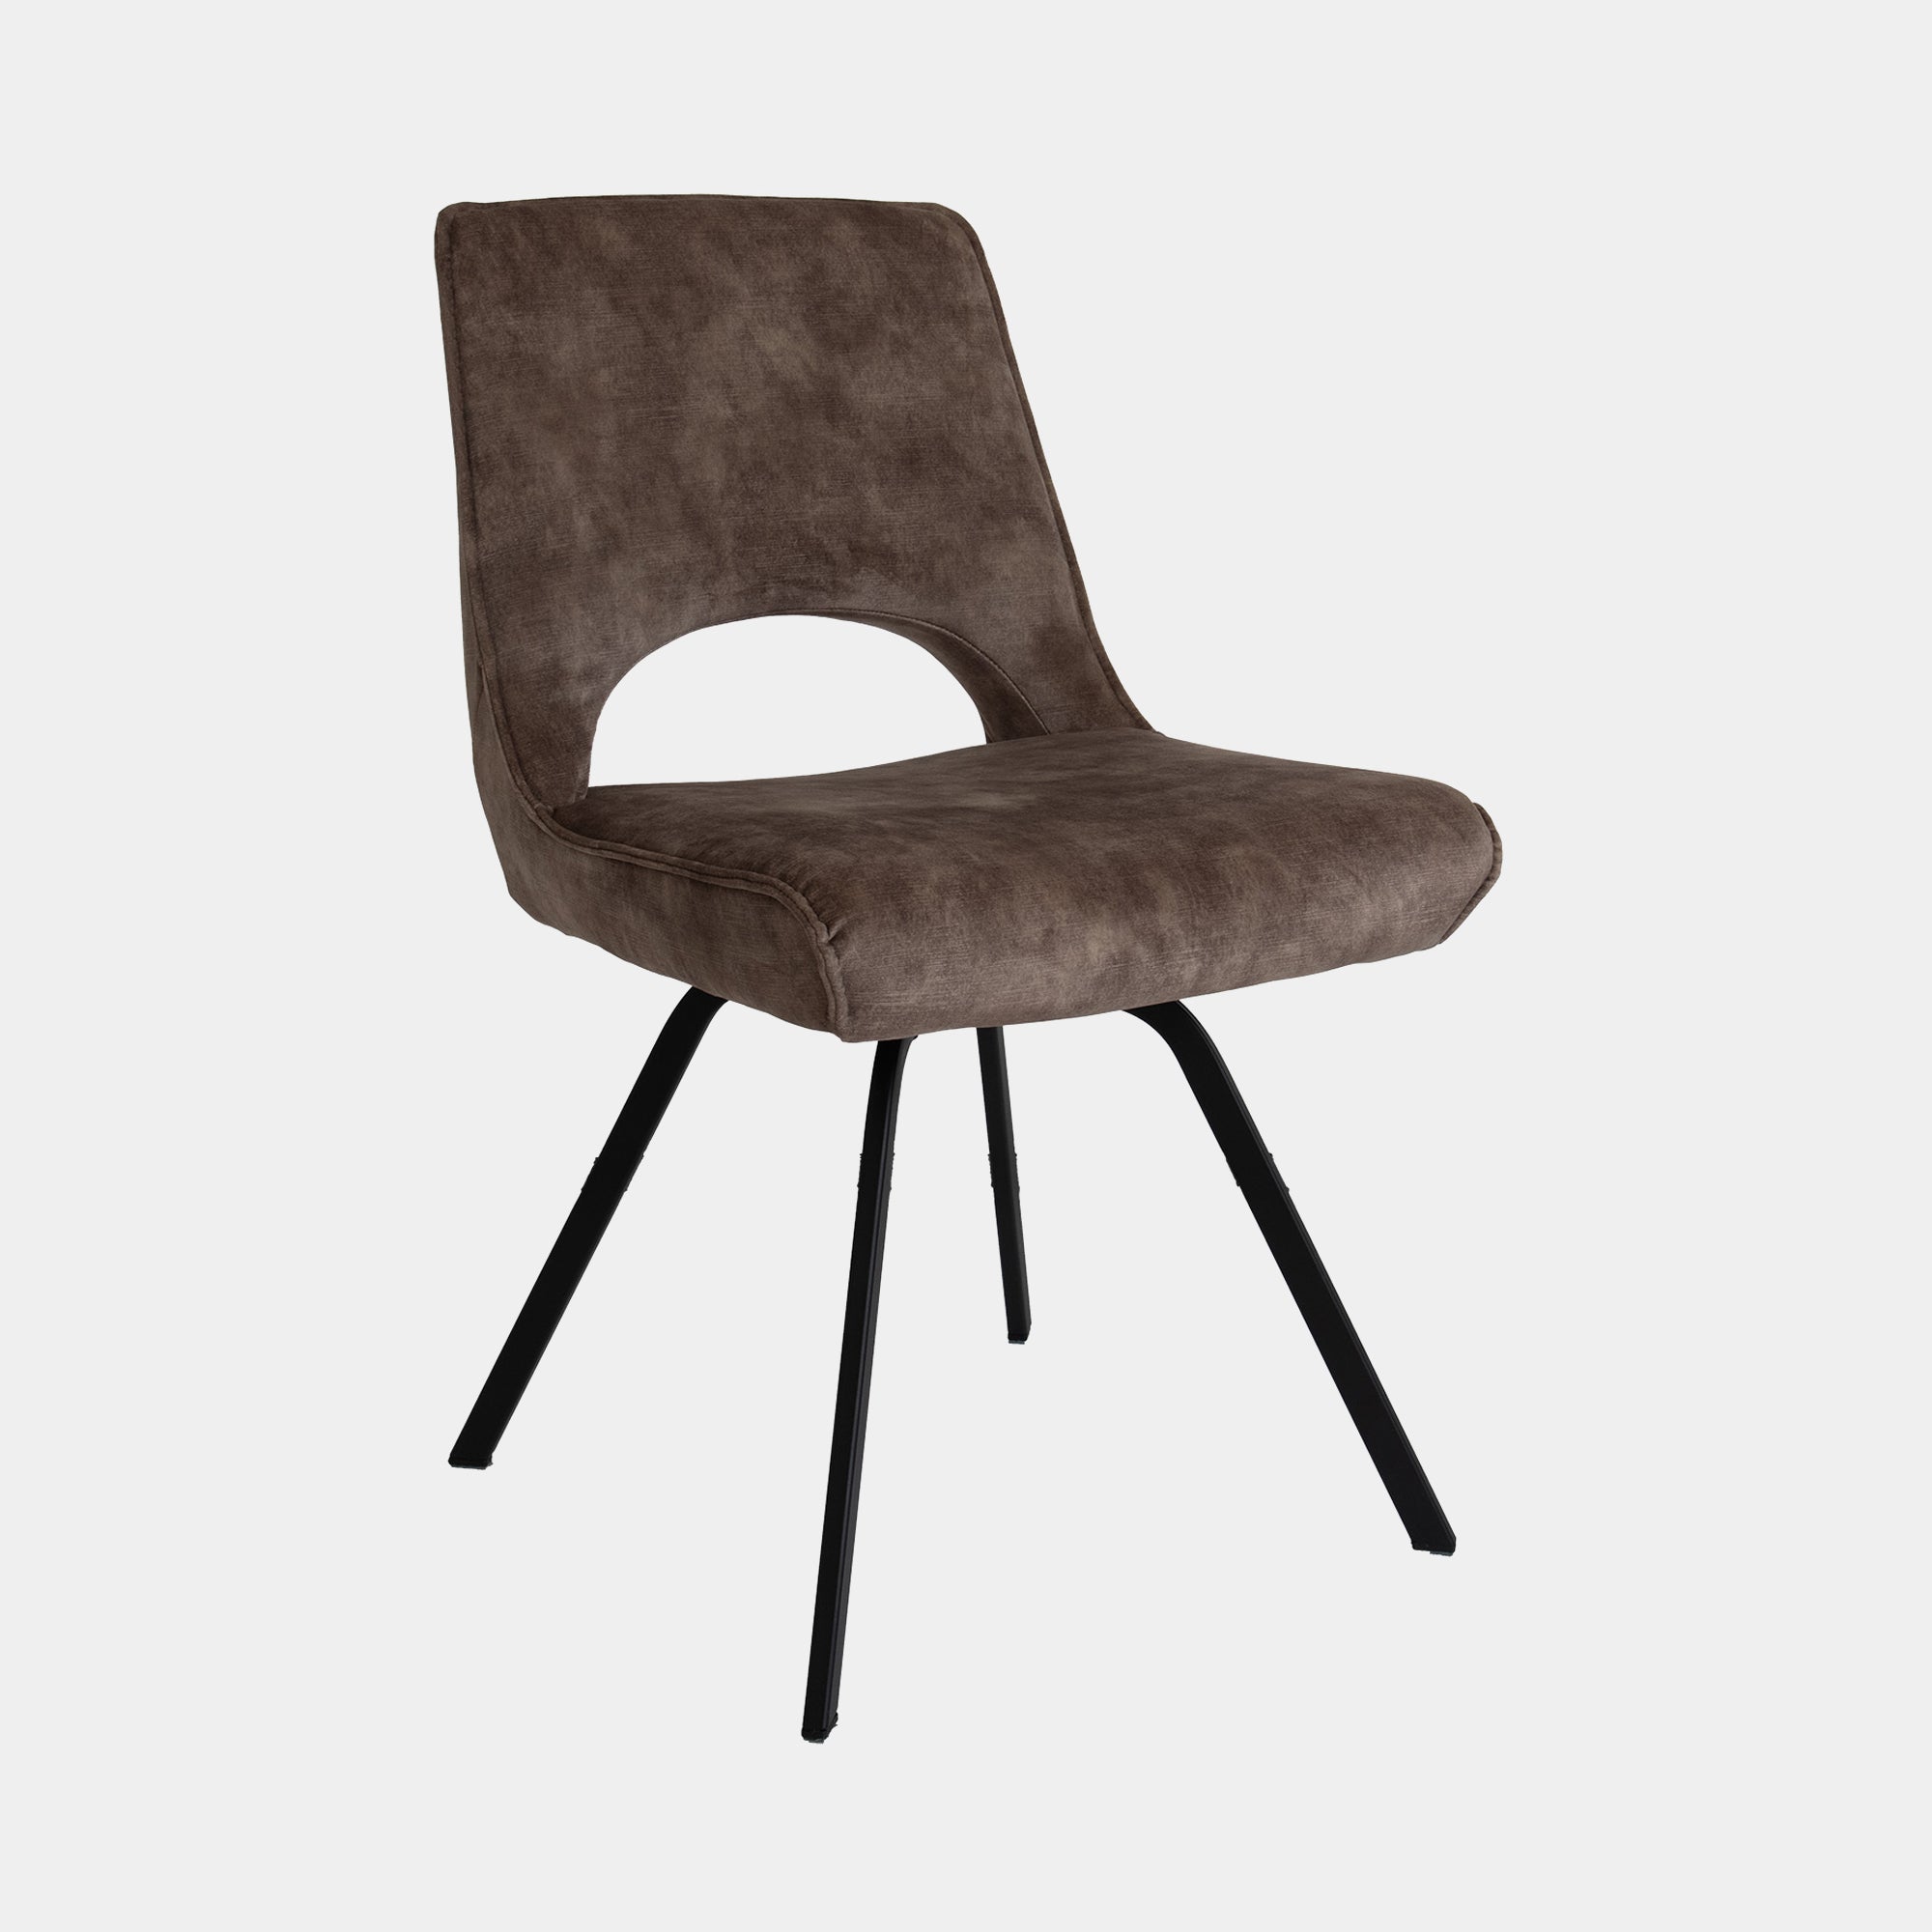 Chair With 'A' Black Metal Leg In Group 3 7293 Latte